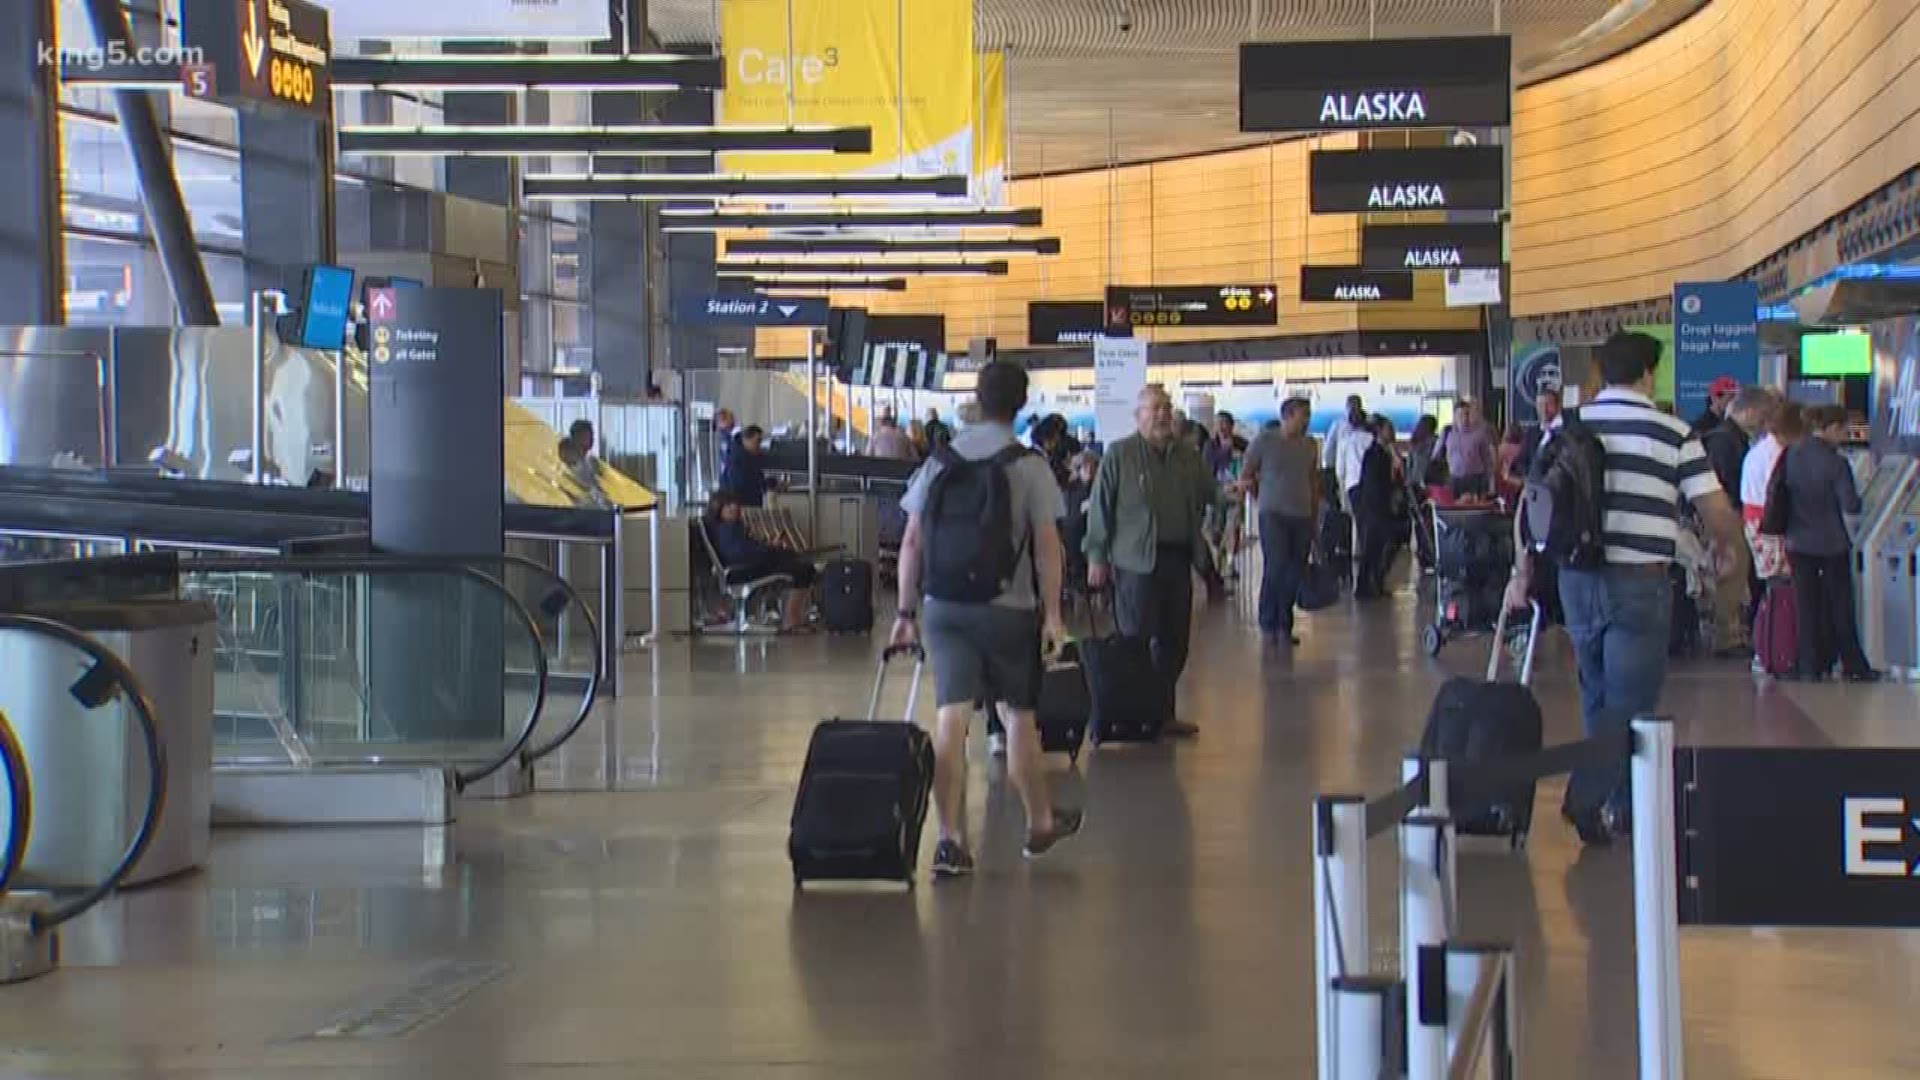 Sea-Tac is expecting to move nearly a half a million passengers over the course of the long holiday weekend.